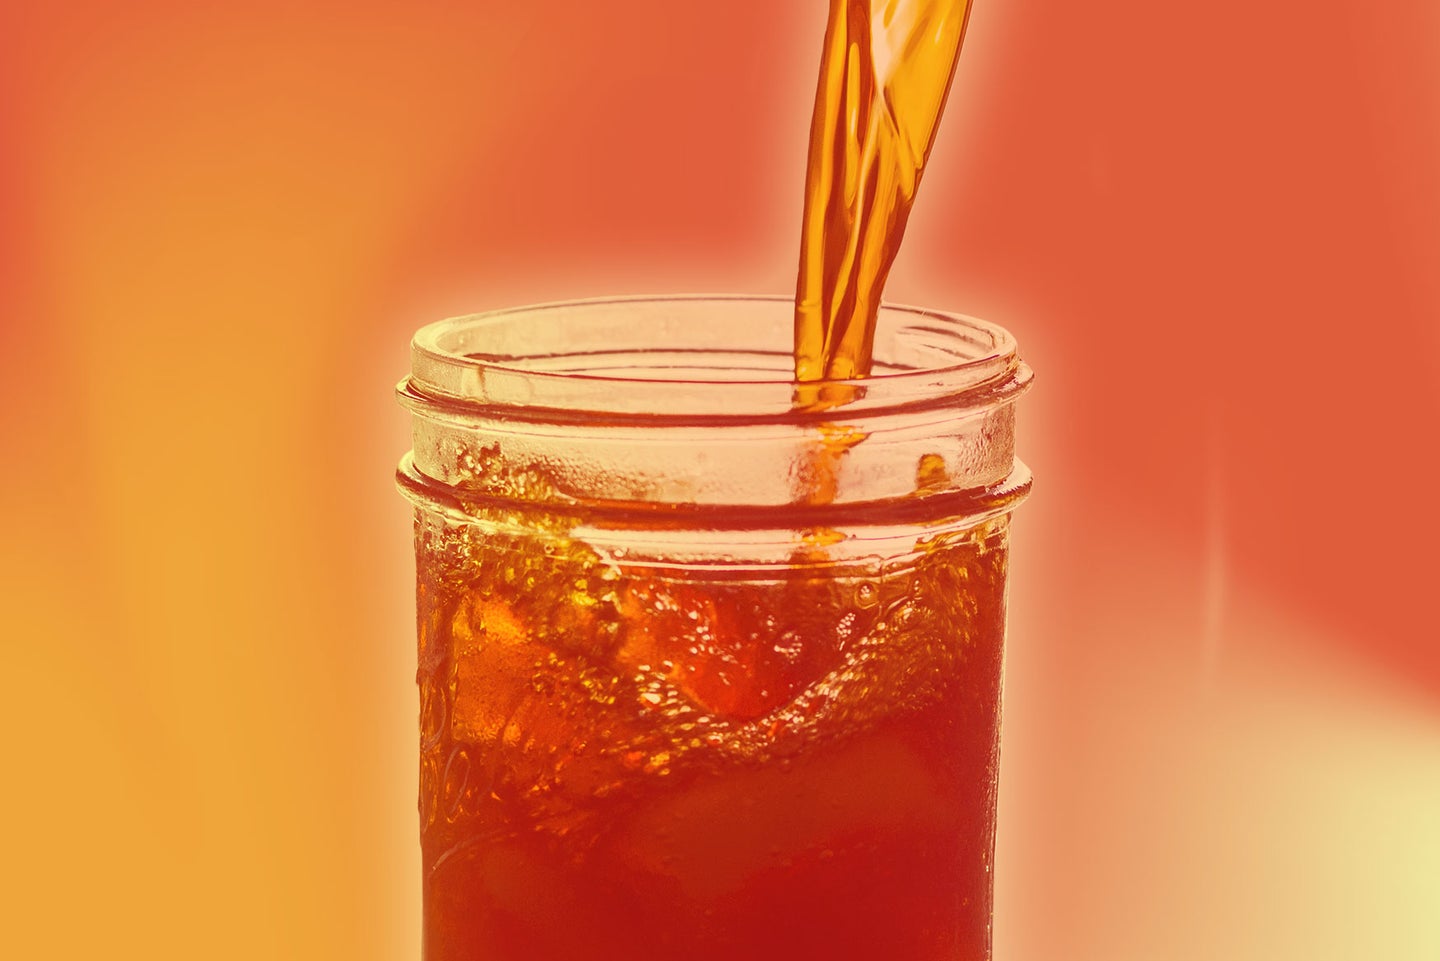 A cold drink like ice tea is poured into a glass with an orange/red overlay.